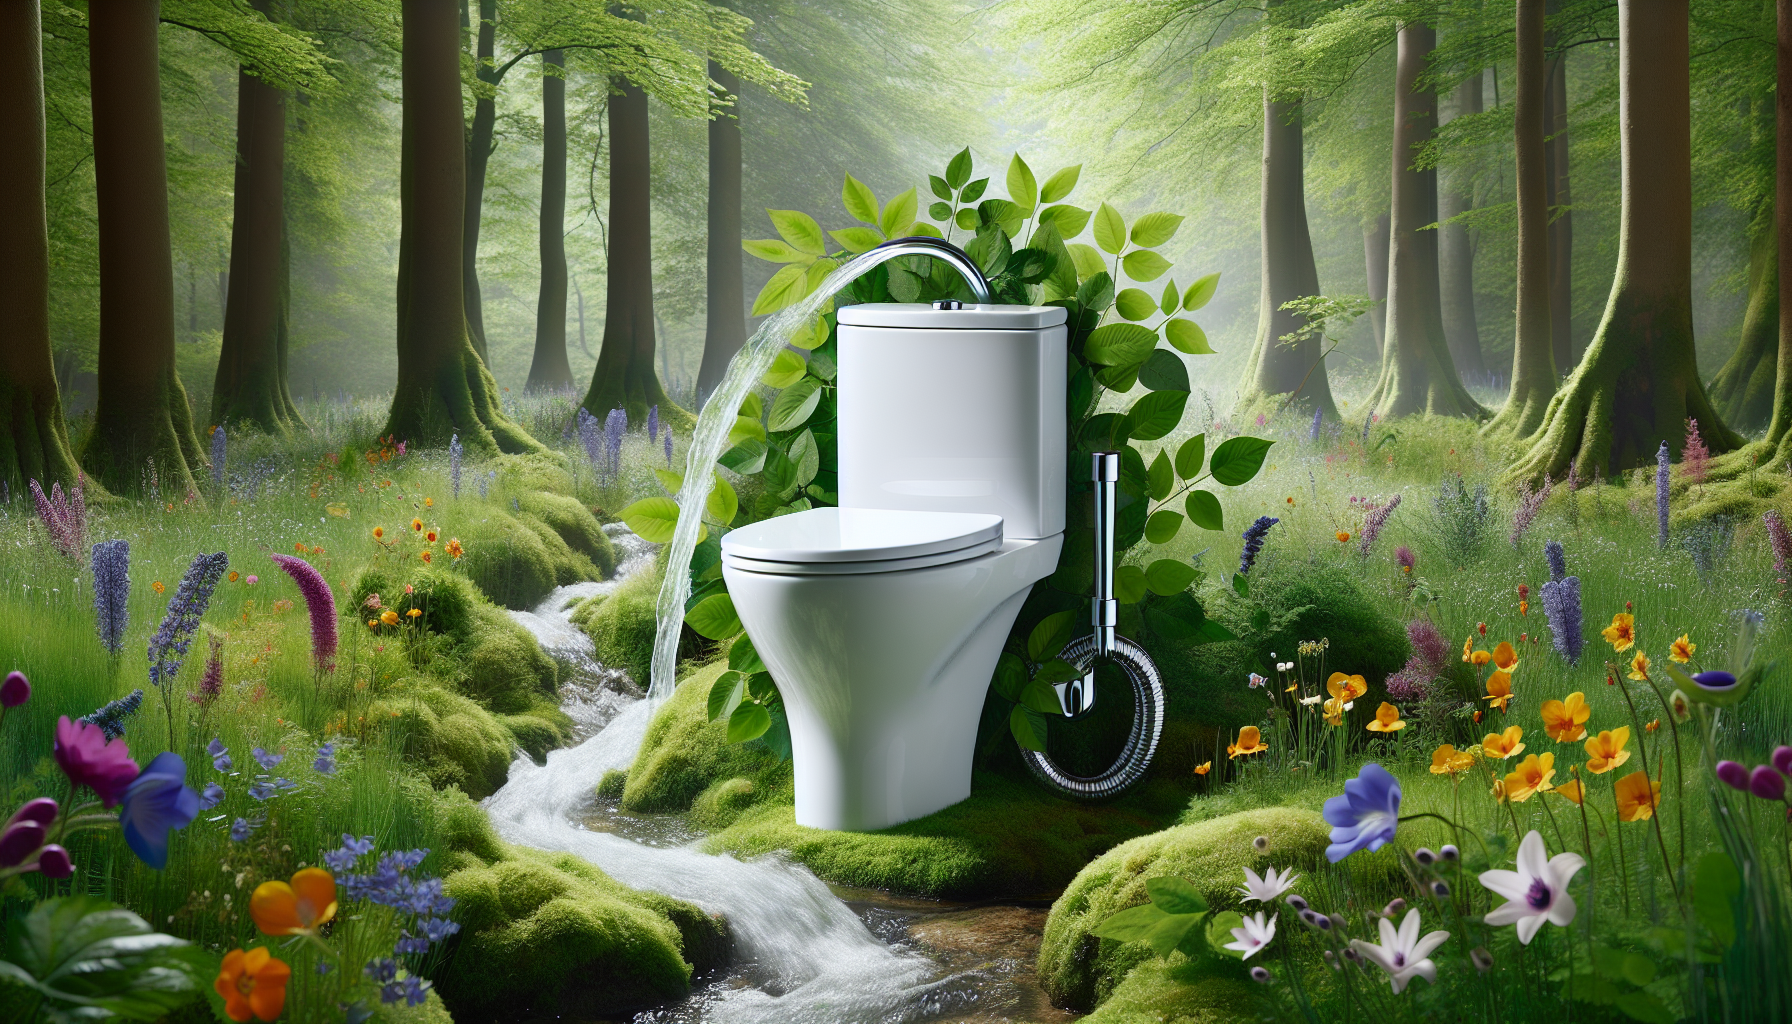 High water efficiency and eco-friendly flow rate of the Stylus Symphony Suite